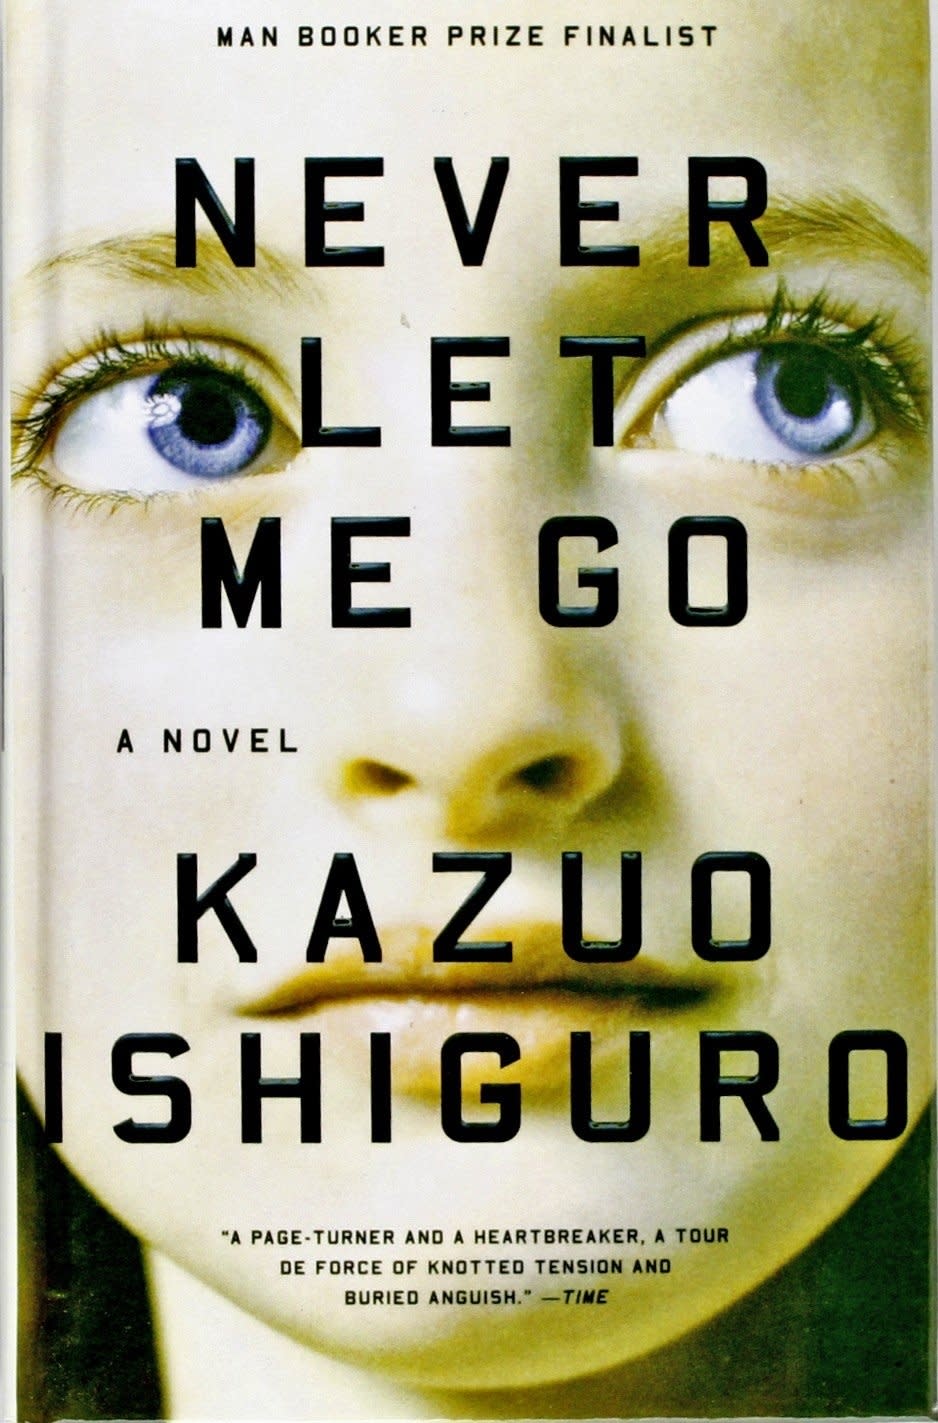 Close-up of 'Never Let Me Go' book cover by Kazuo Ishiguro, featuring title and author's name with a pair of eyes